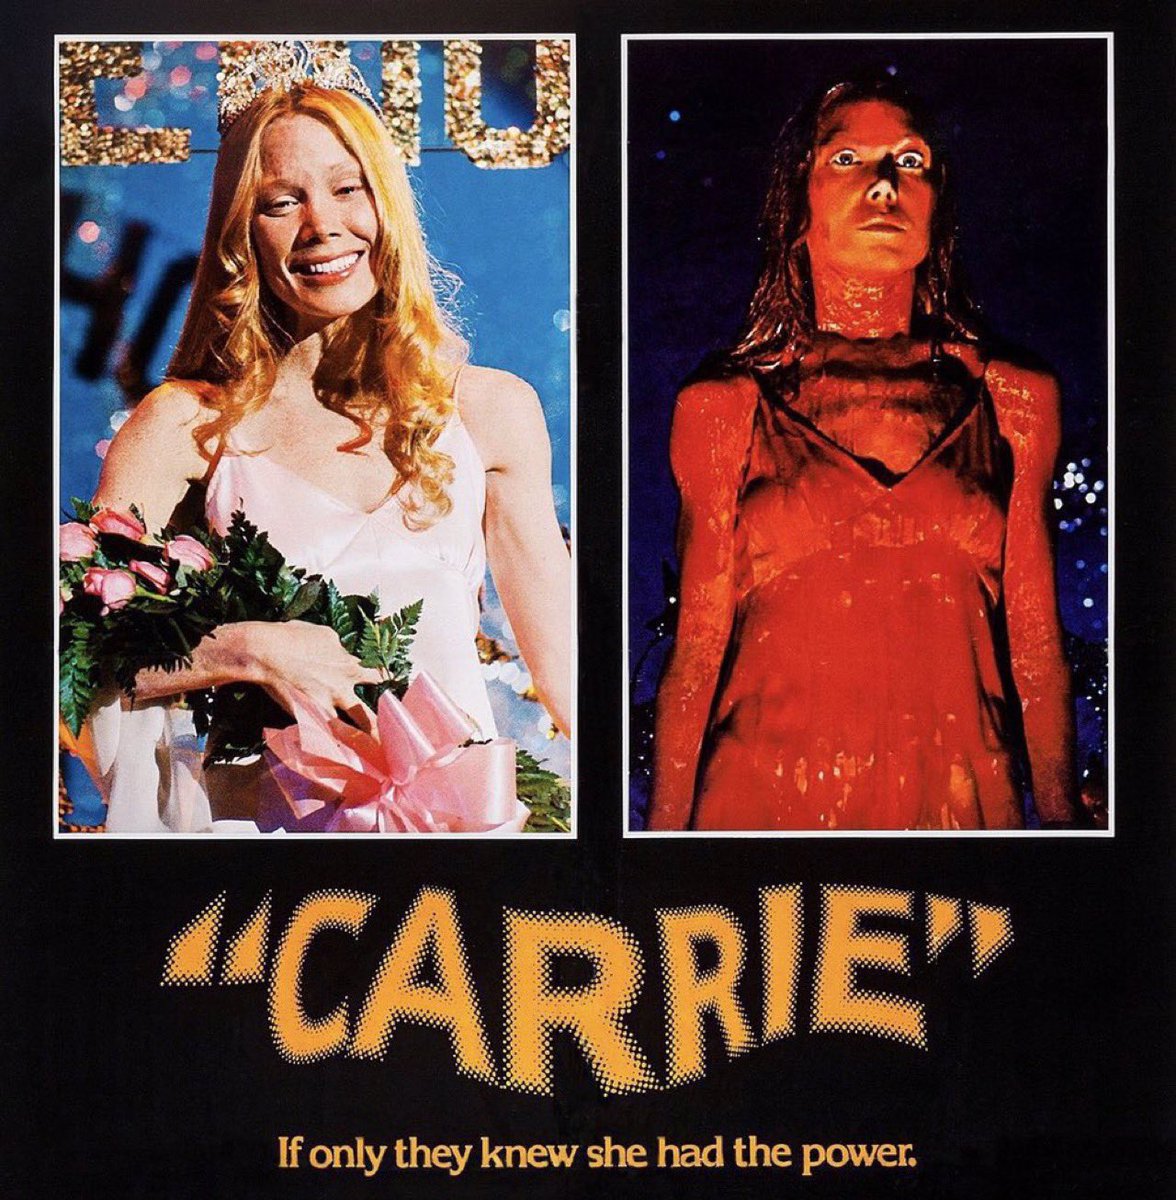 Carrie Johnson when she sees she’s trending again on Twitter for all the wrong reasons… ‘If only we knew she had the power’.
#CarrieAntoinette #CarrieOut #CashAndCarrie